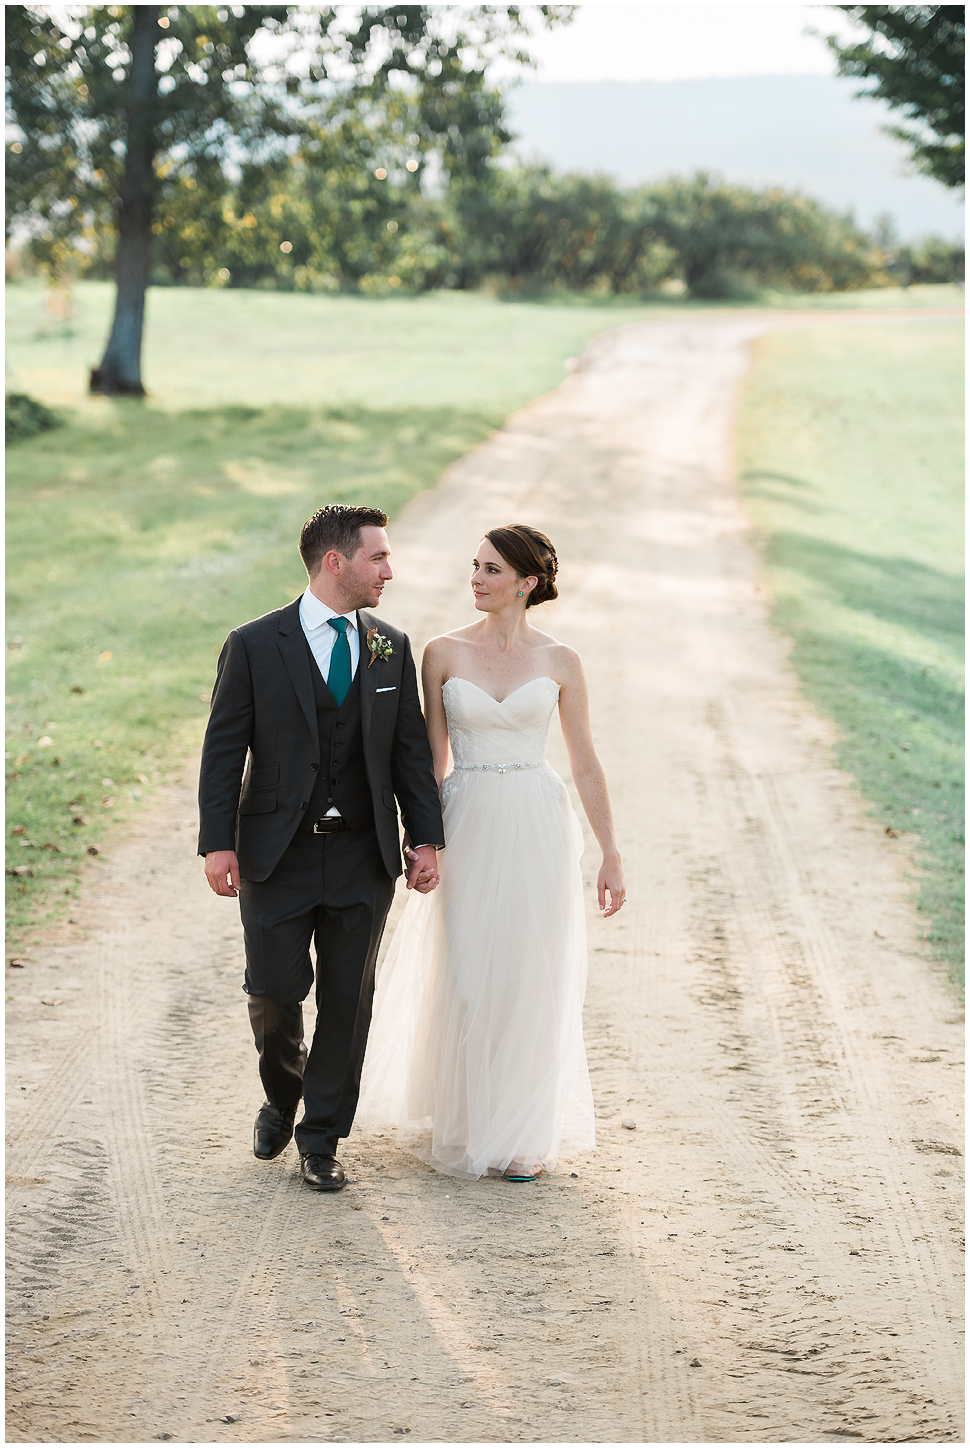 Bride and Groom walk hand in hand on a dirt path. 